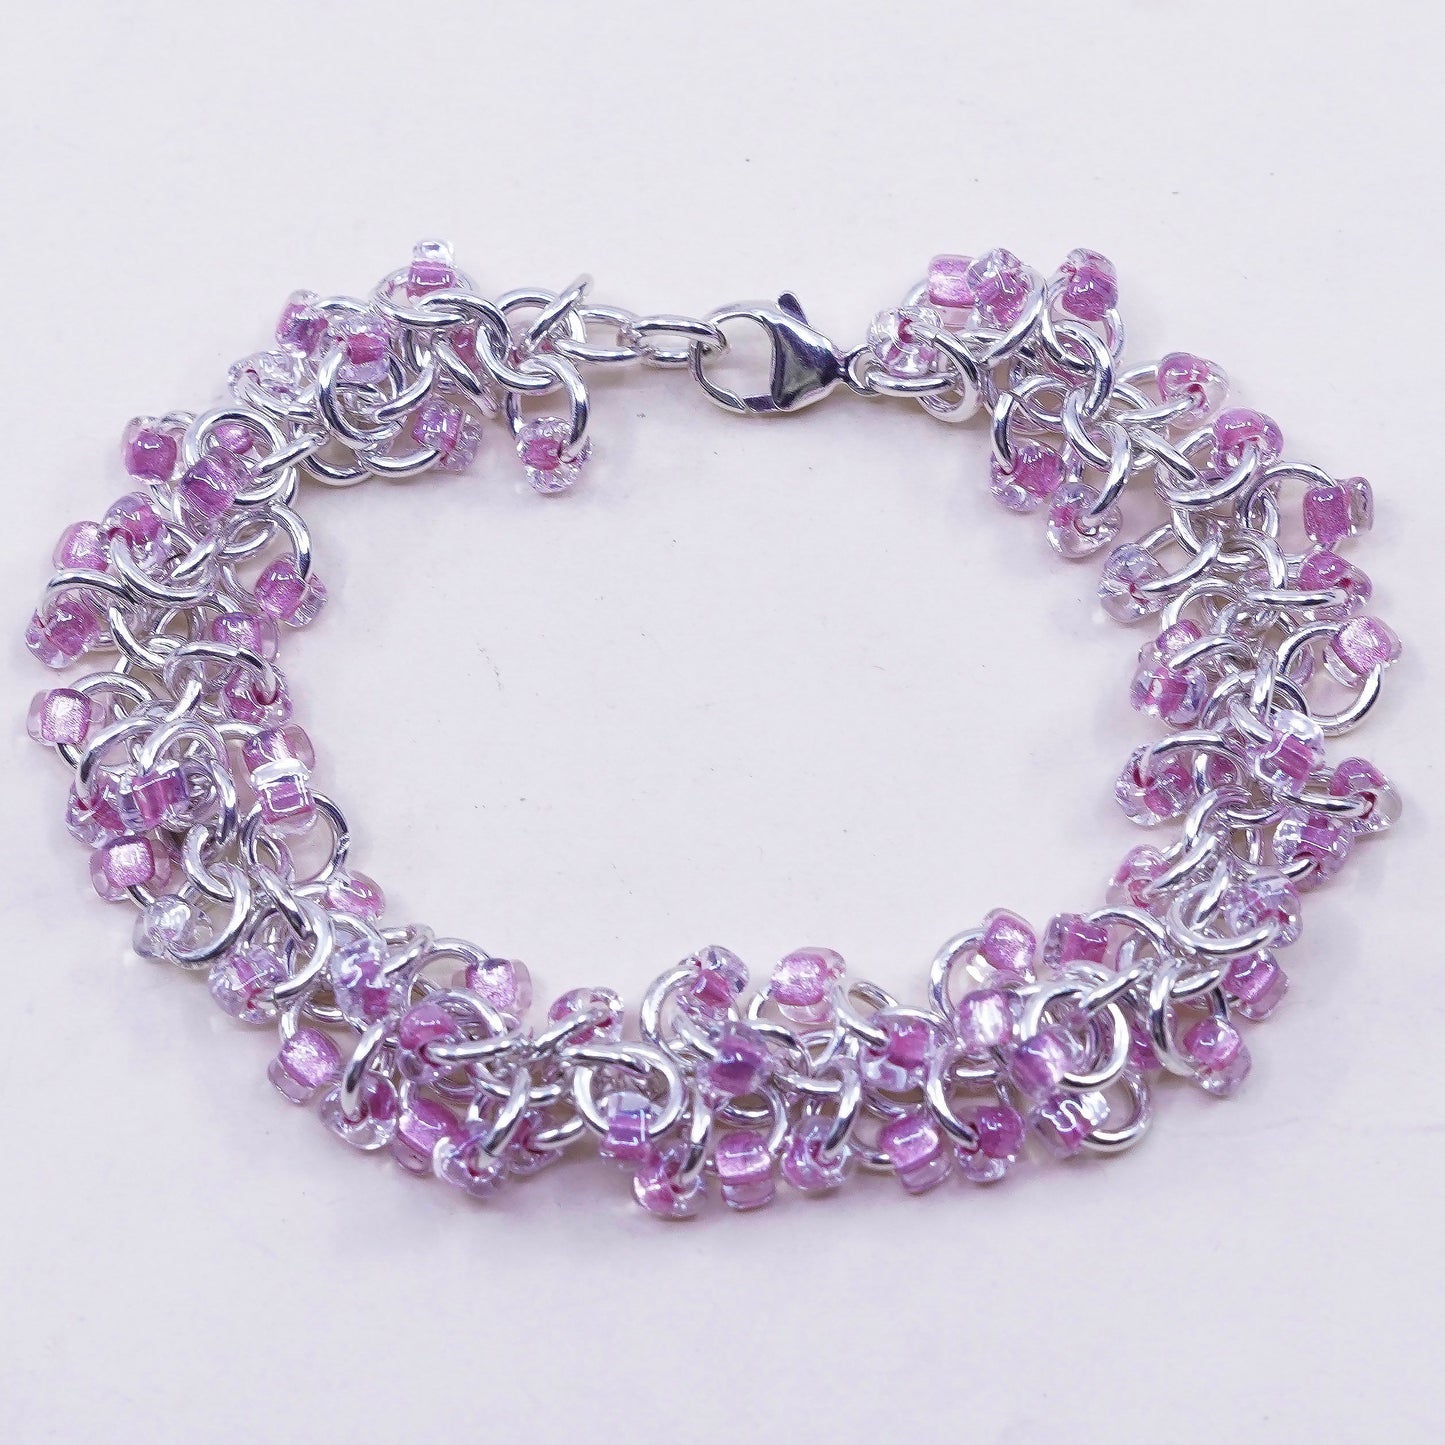 7”, Vintage sterling silver bracelet, 925 circle chain with cluster pink beads